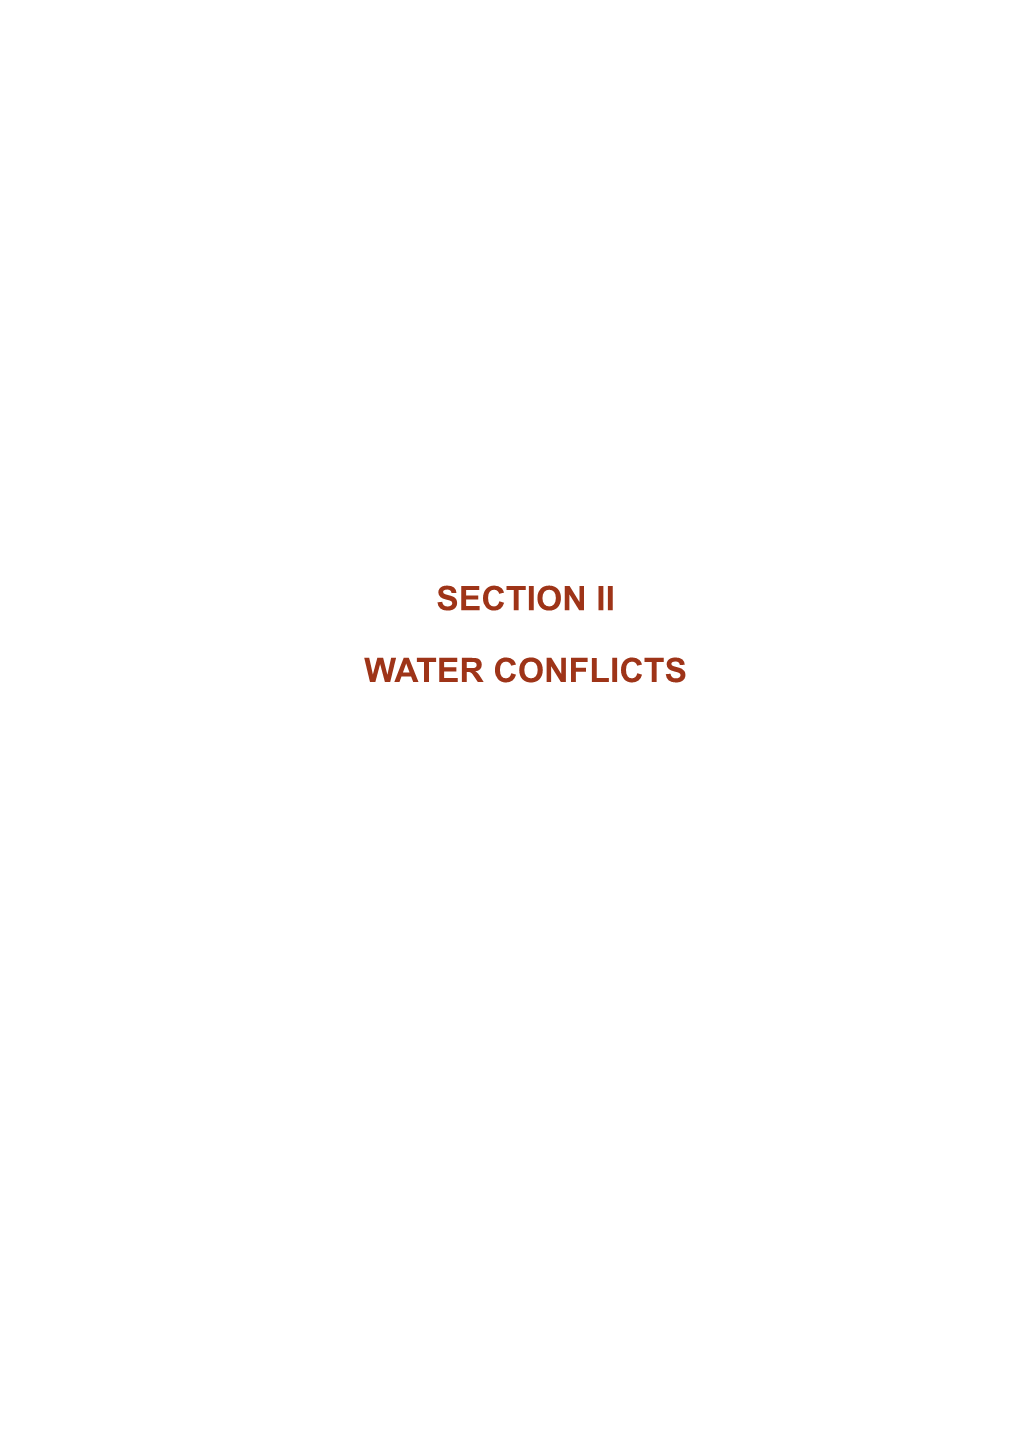 Analysis of Water Use Patterns and Conflicts in the Sa Pobla Plain and Alcudia Bay (Majorca, Spain)